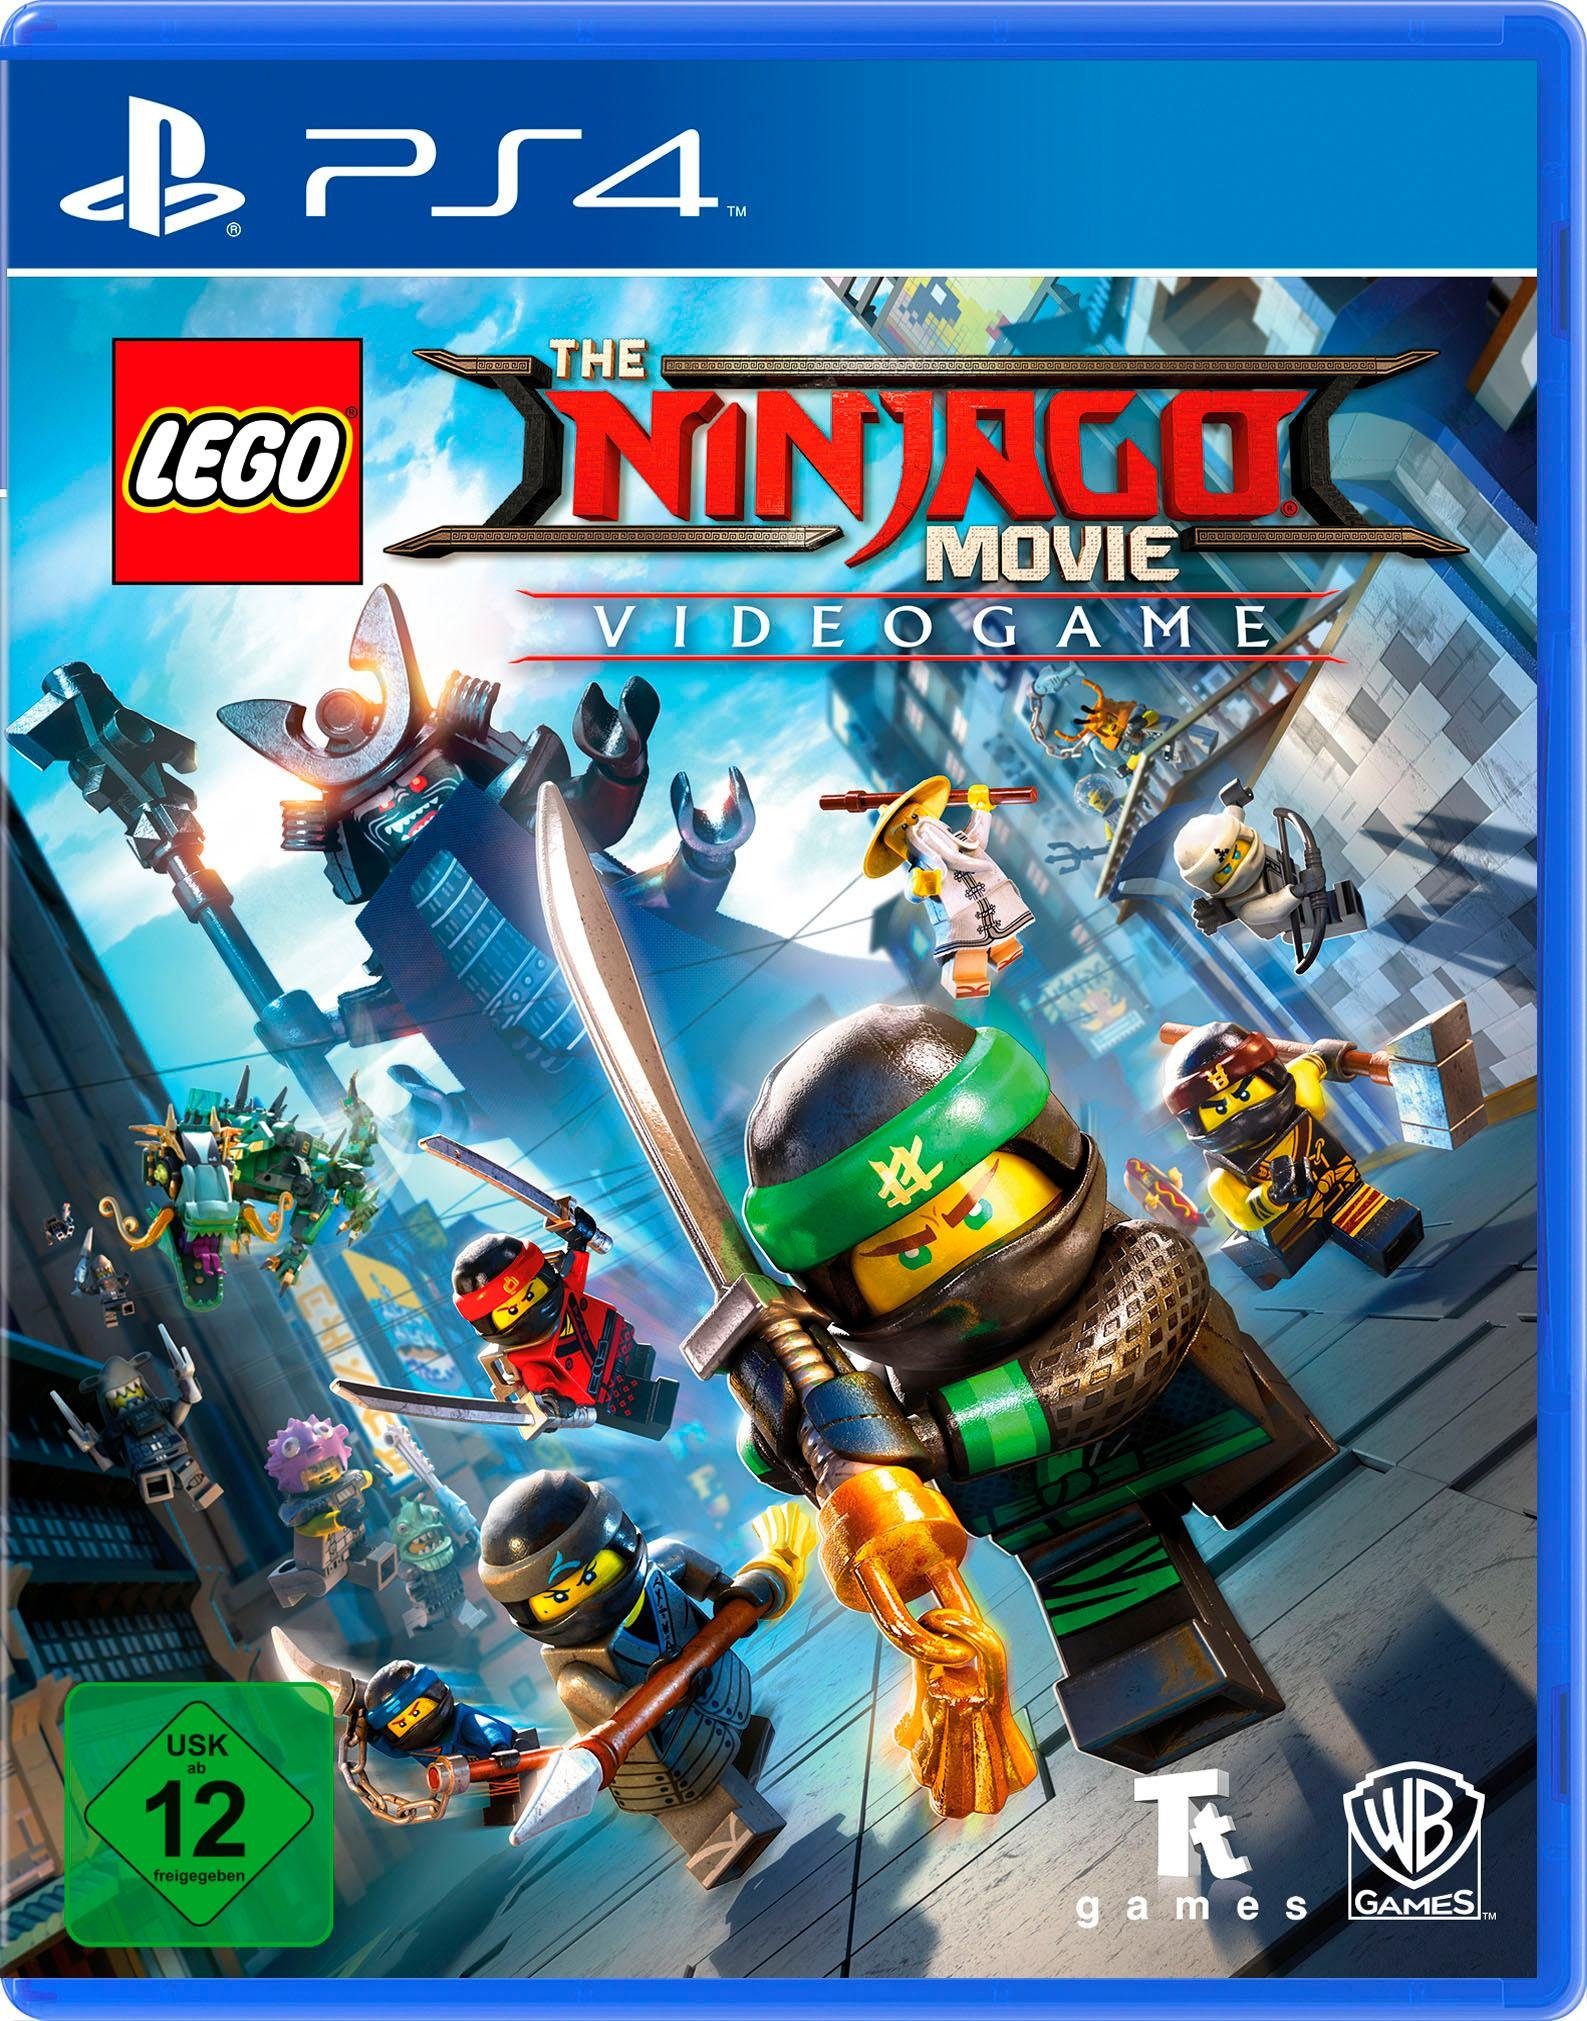 The LEGO Movie Videogame PlayStation Software 4, Pyramide